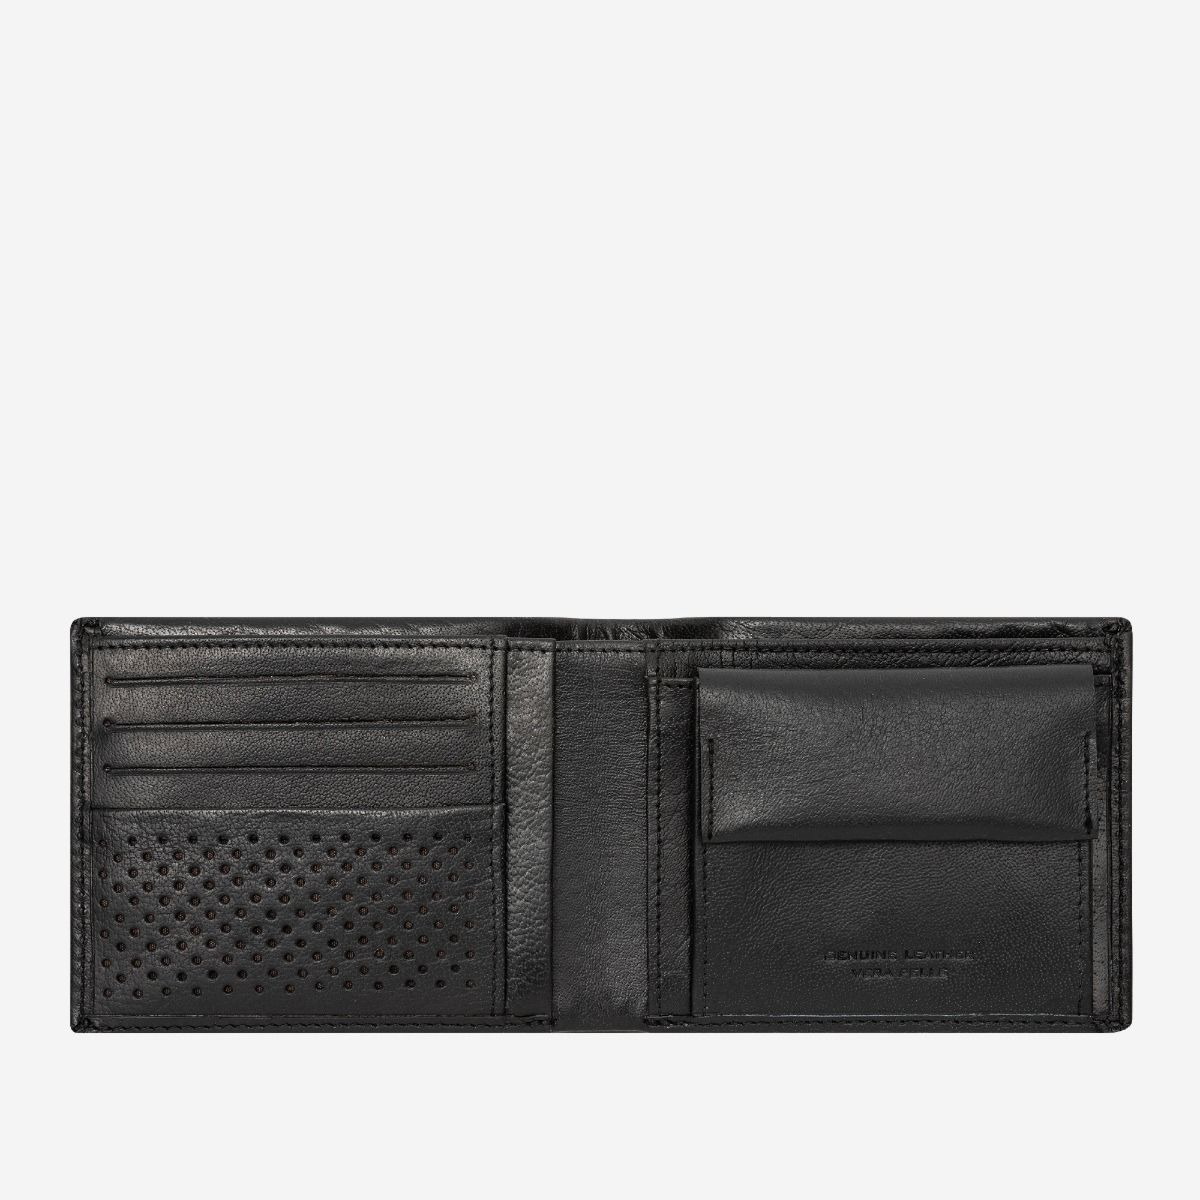 DuDu Mens Minimalist Leather Wallet with Coin Holder - Black